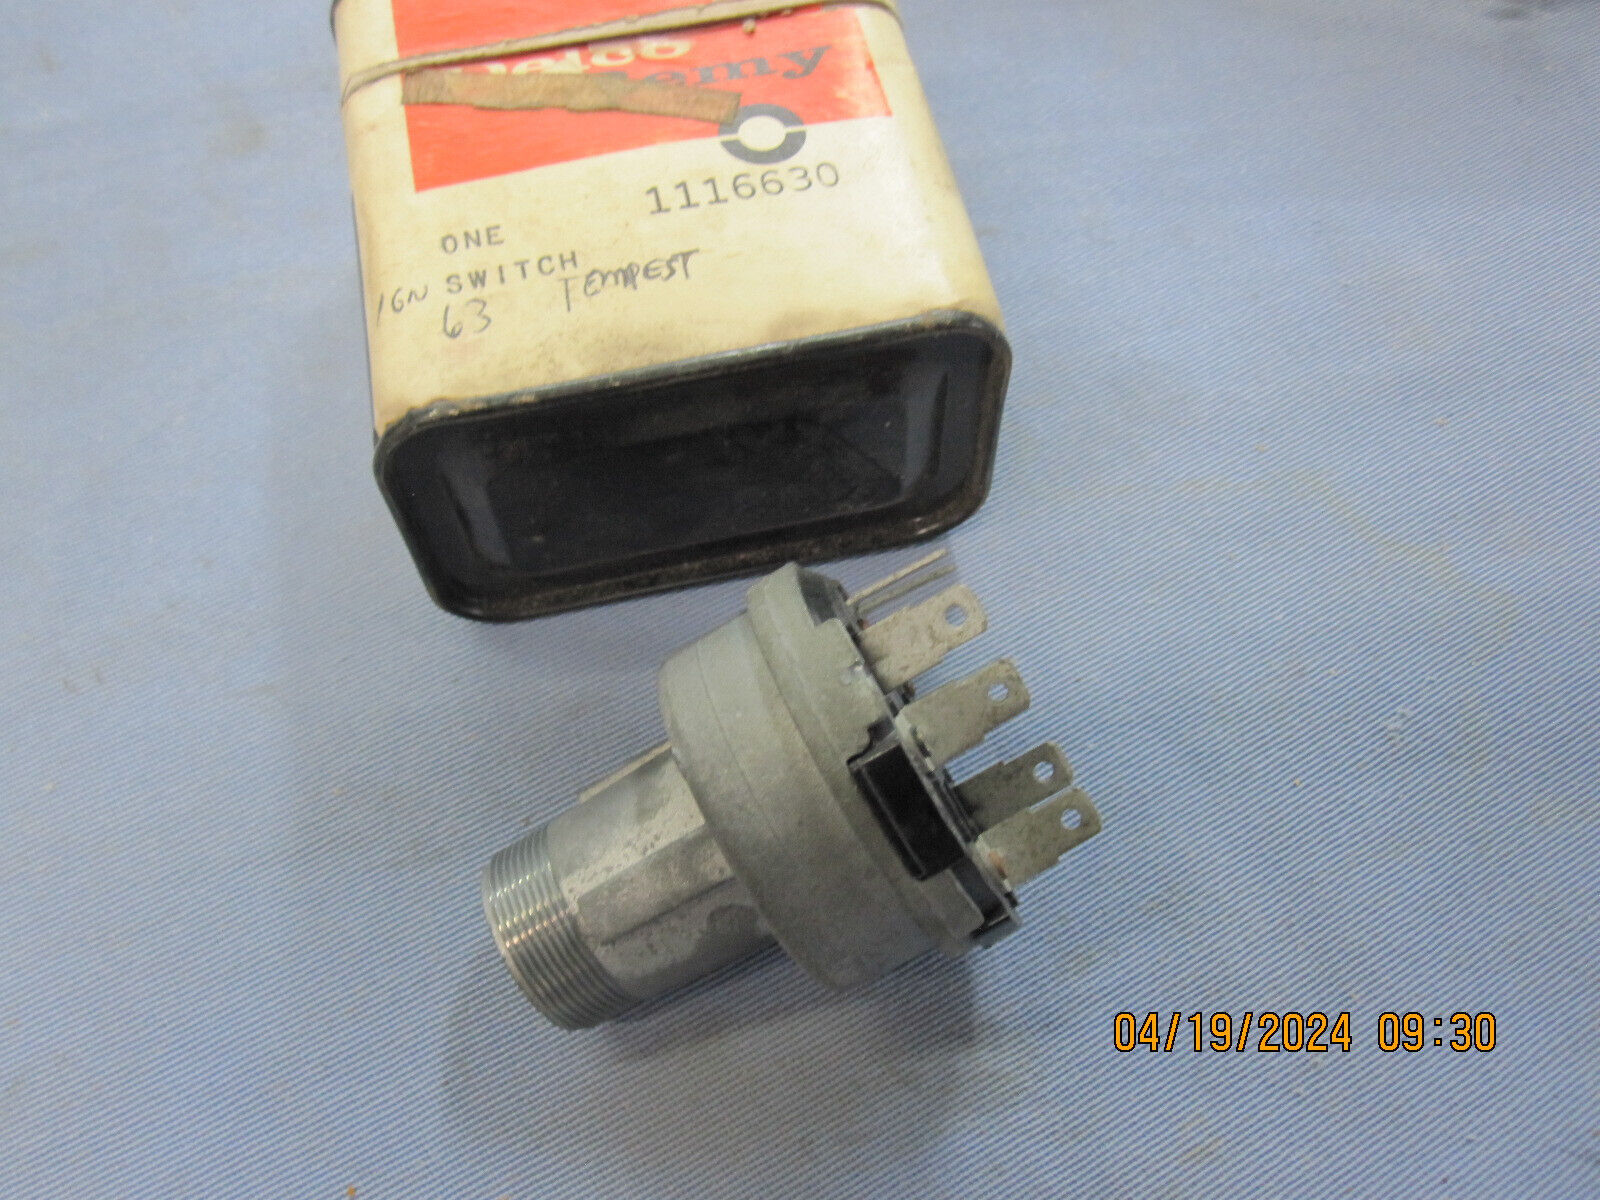 NOS 1963 Tempest Lemans Delco-Remy Ignition Switch D-1459  GM # 1116630